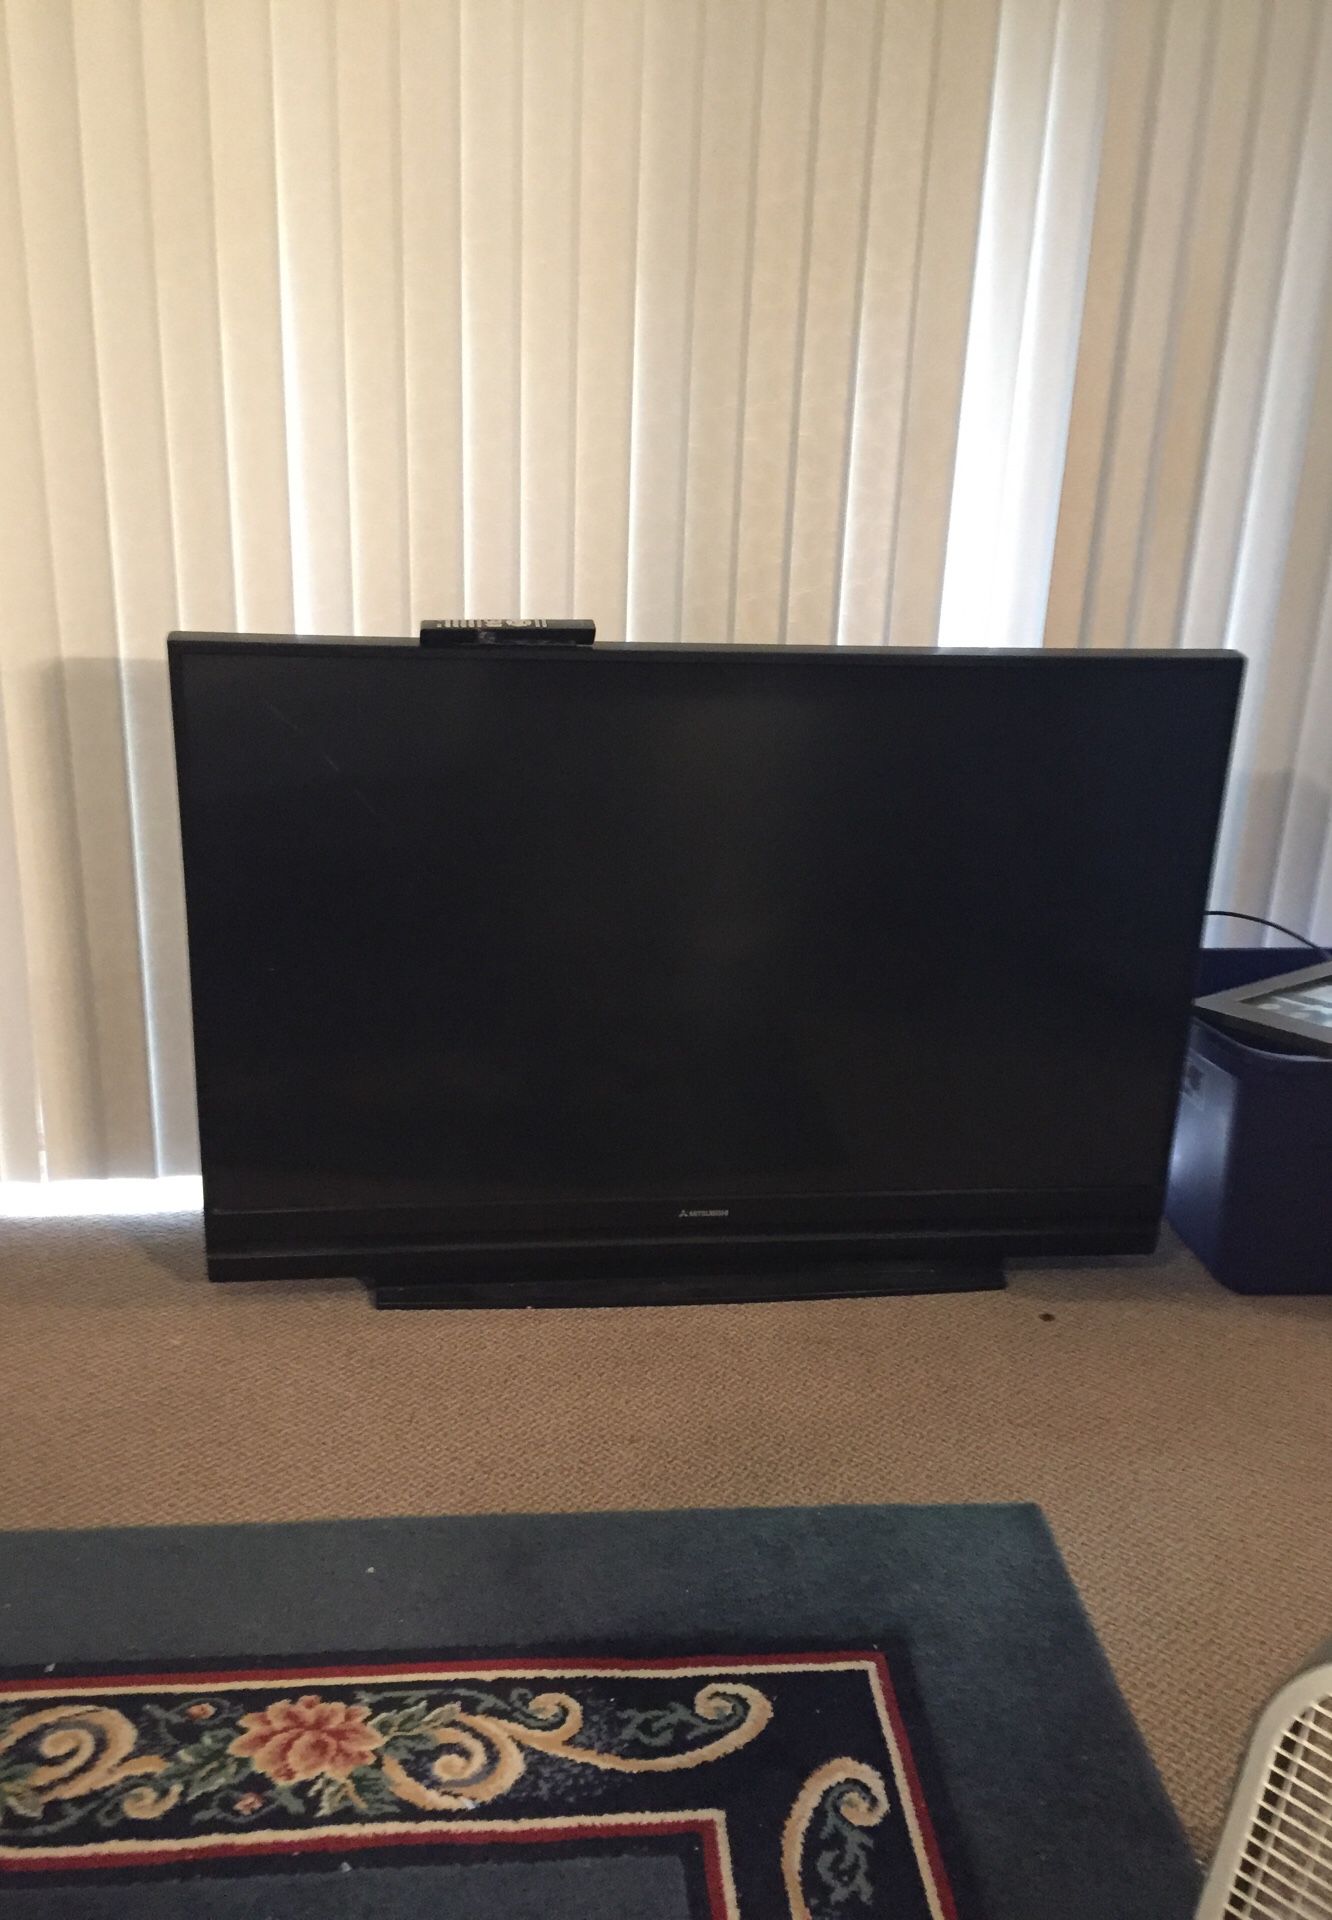 60 projection tv -works but has many little white dots on the screen